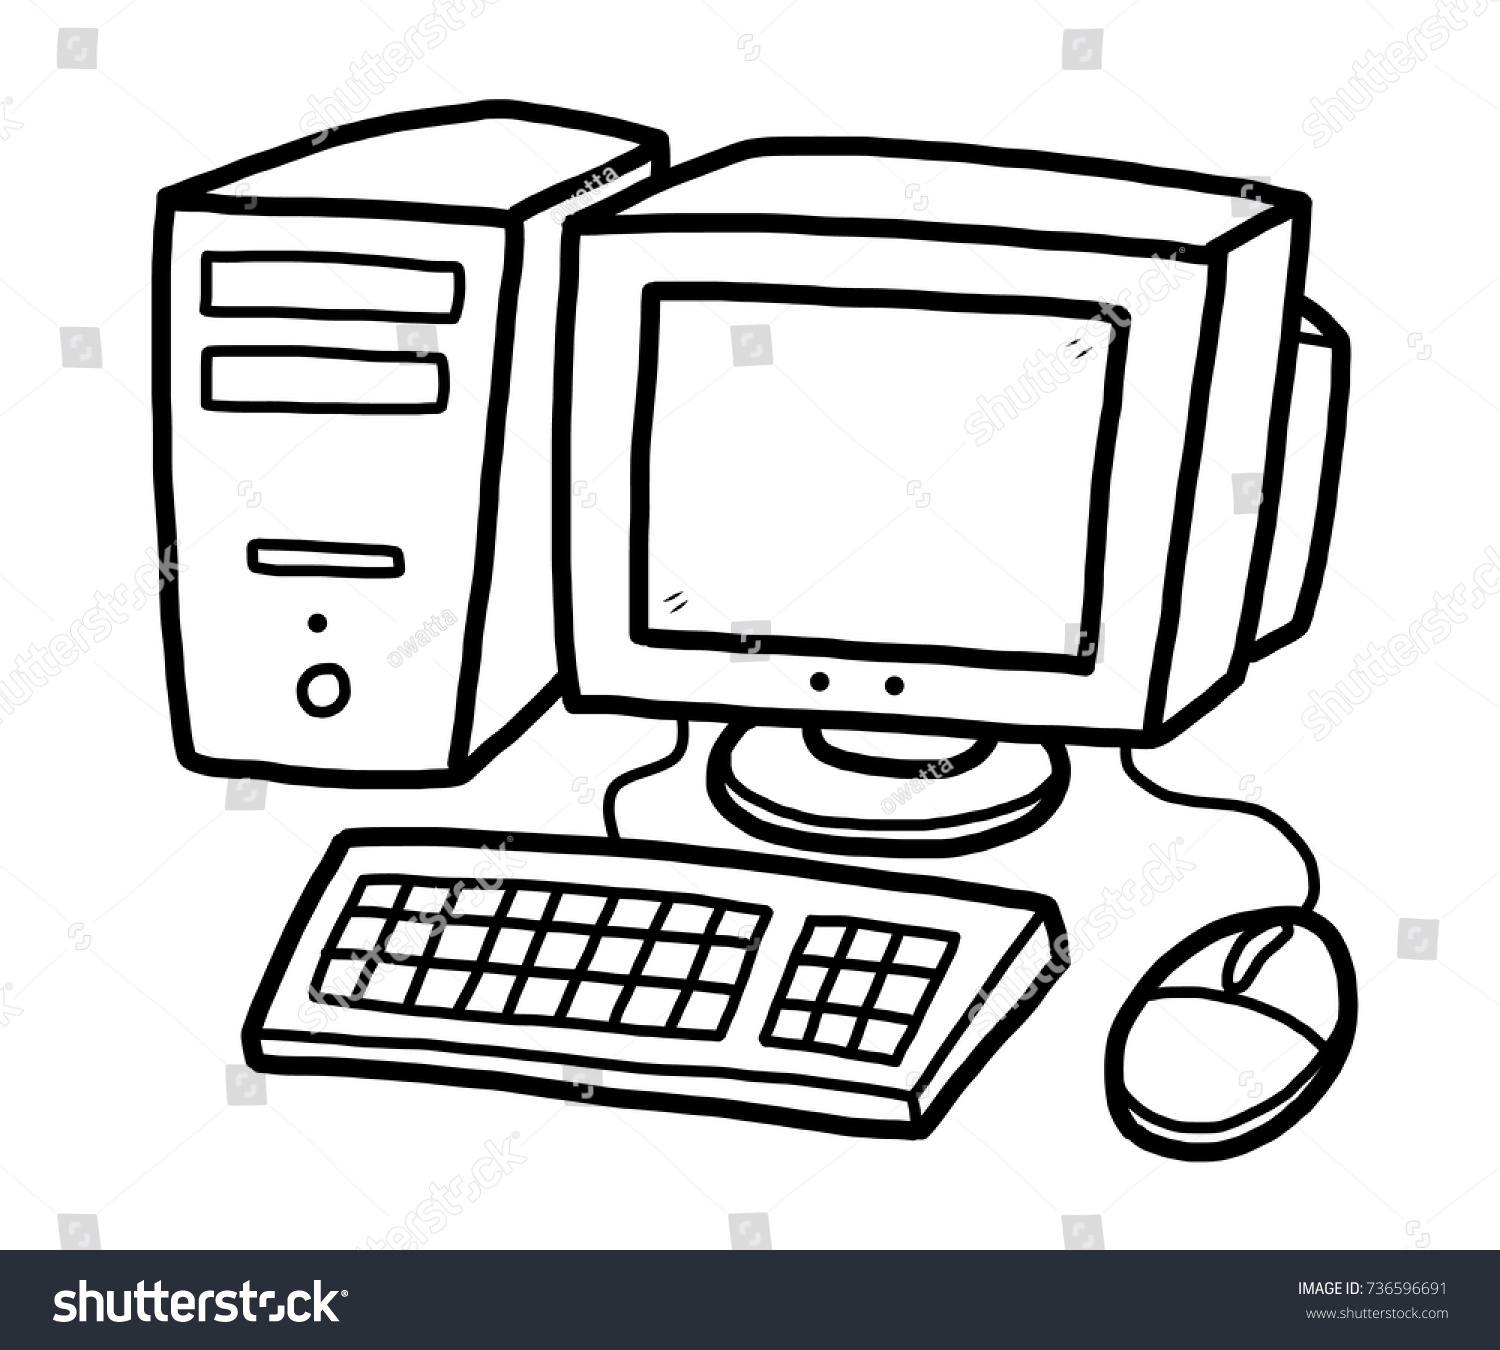 Computer Cpu Clipart Black And White.